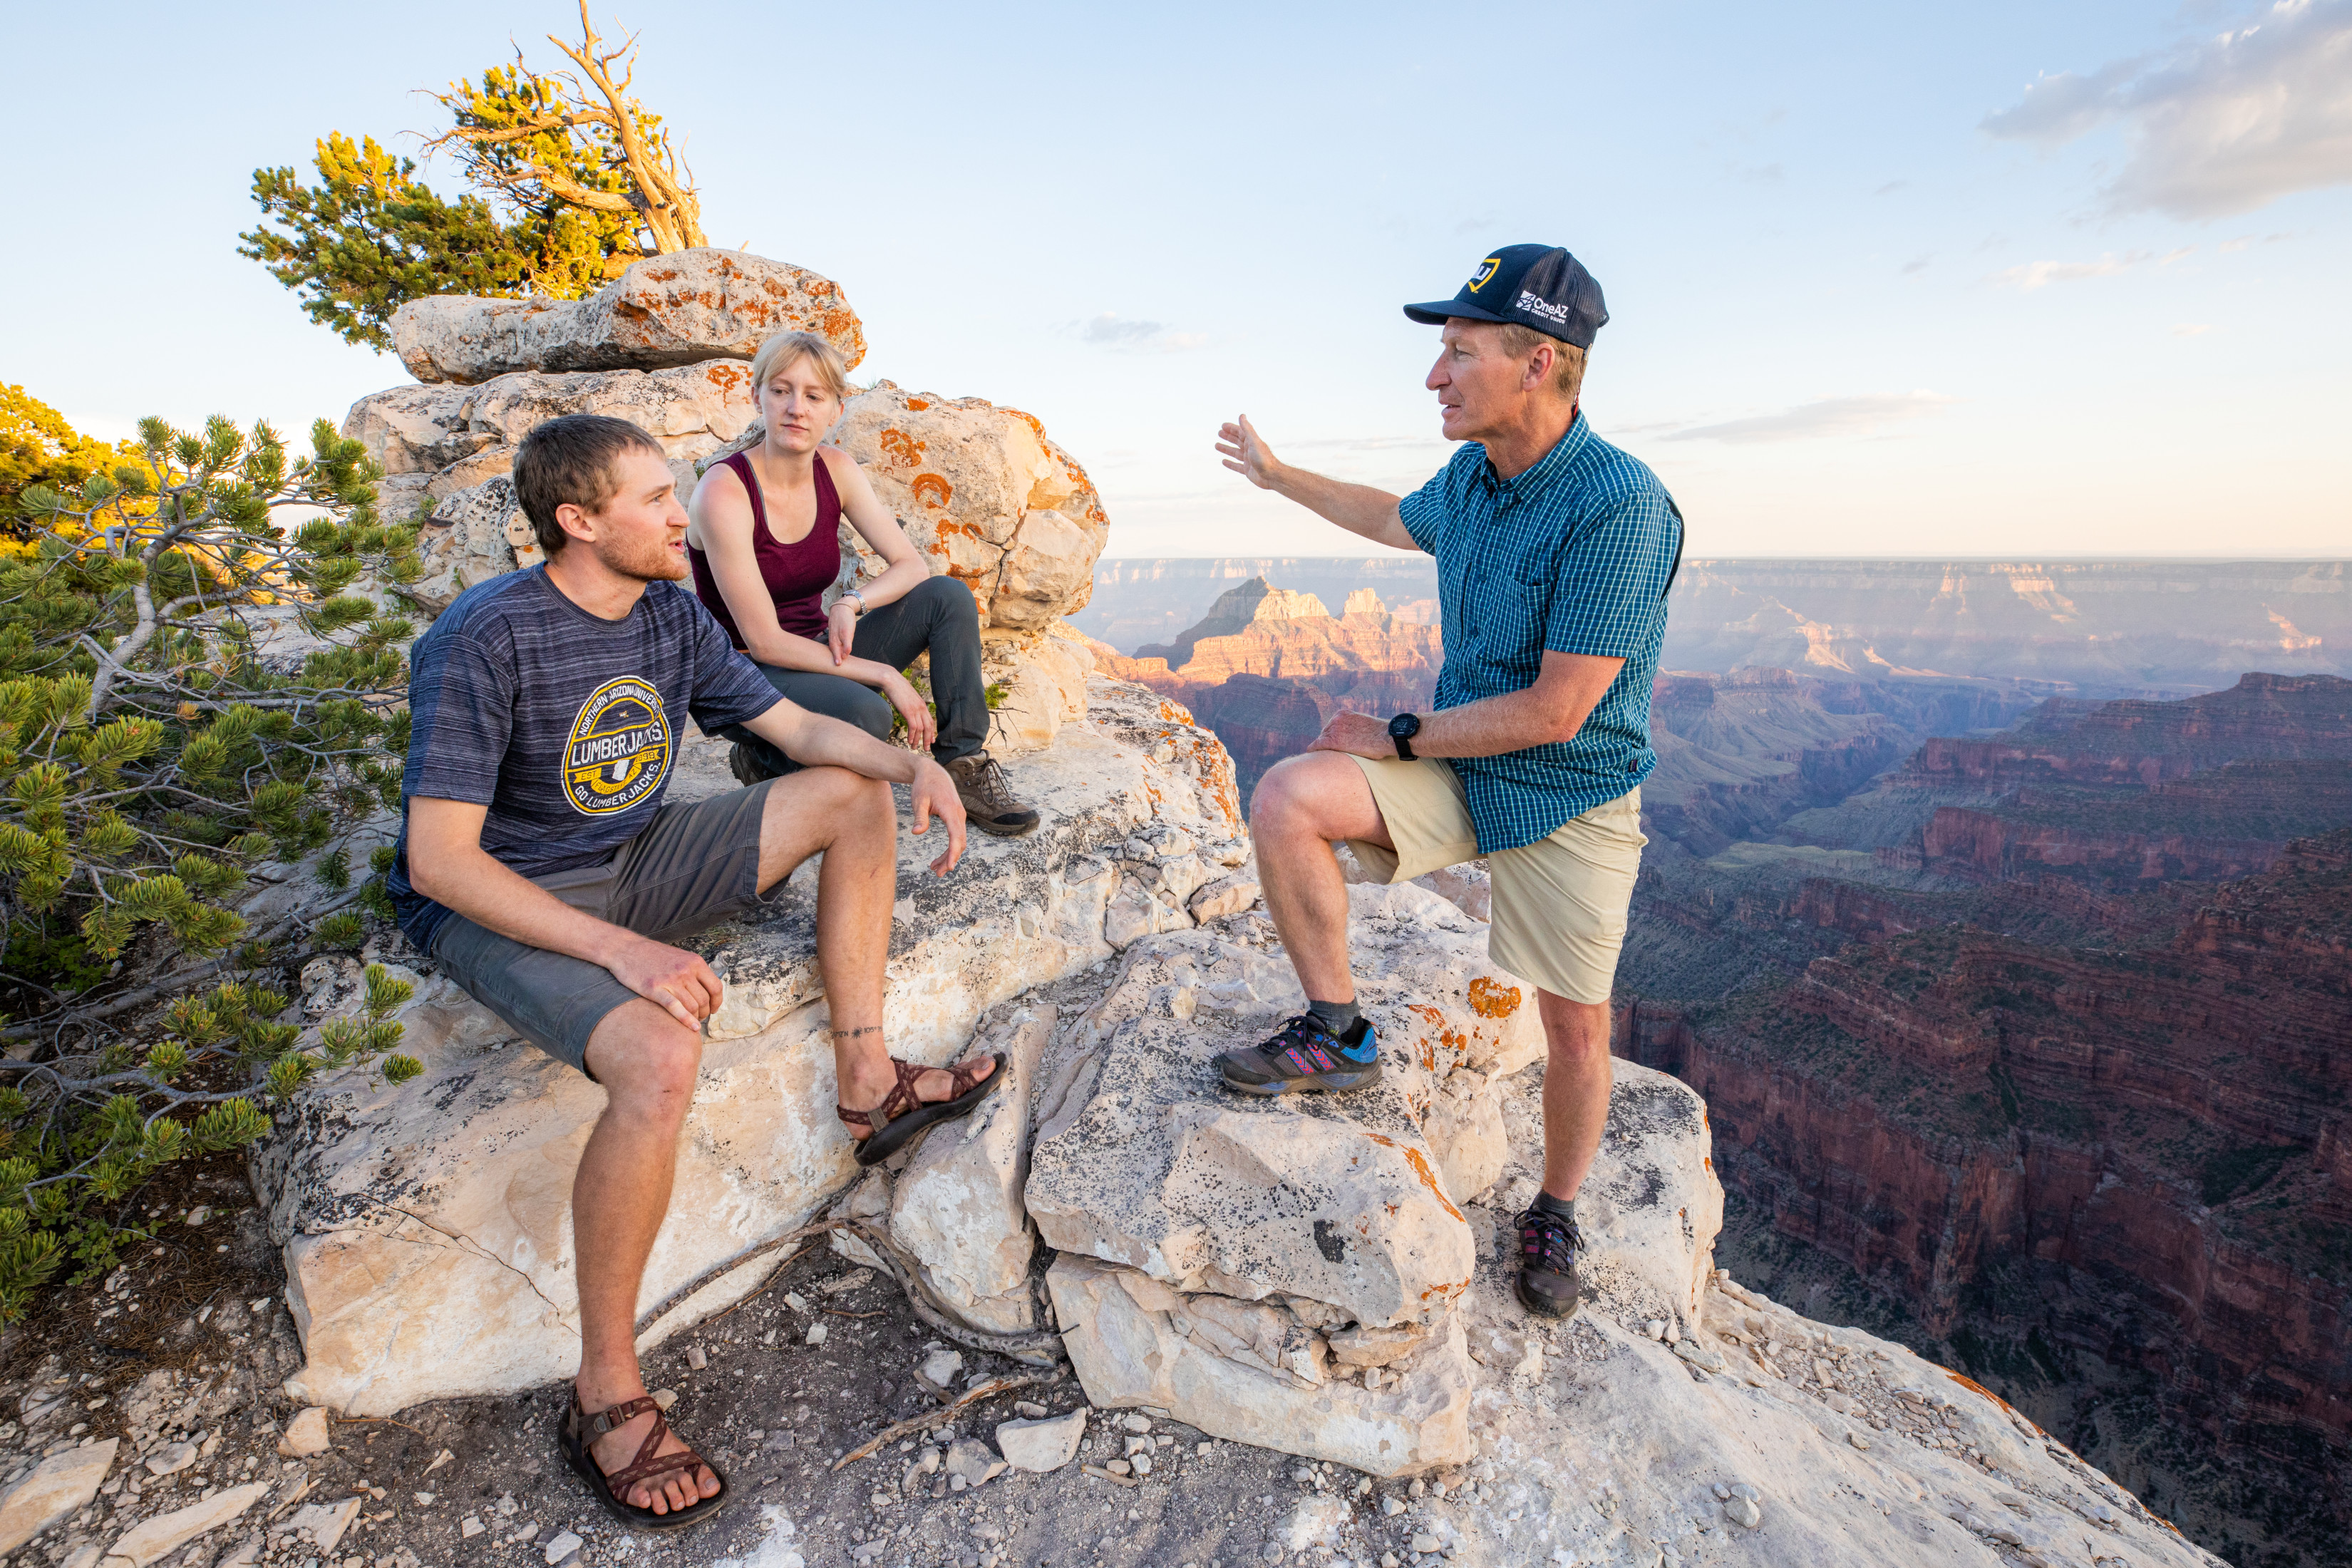 N A U Professor addressing students at the top of a Grand Canyon summit, with iconic Grand Canyon rock views in the background.